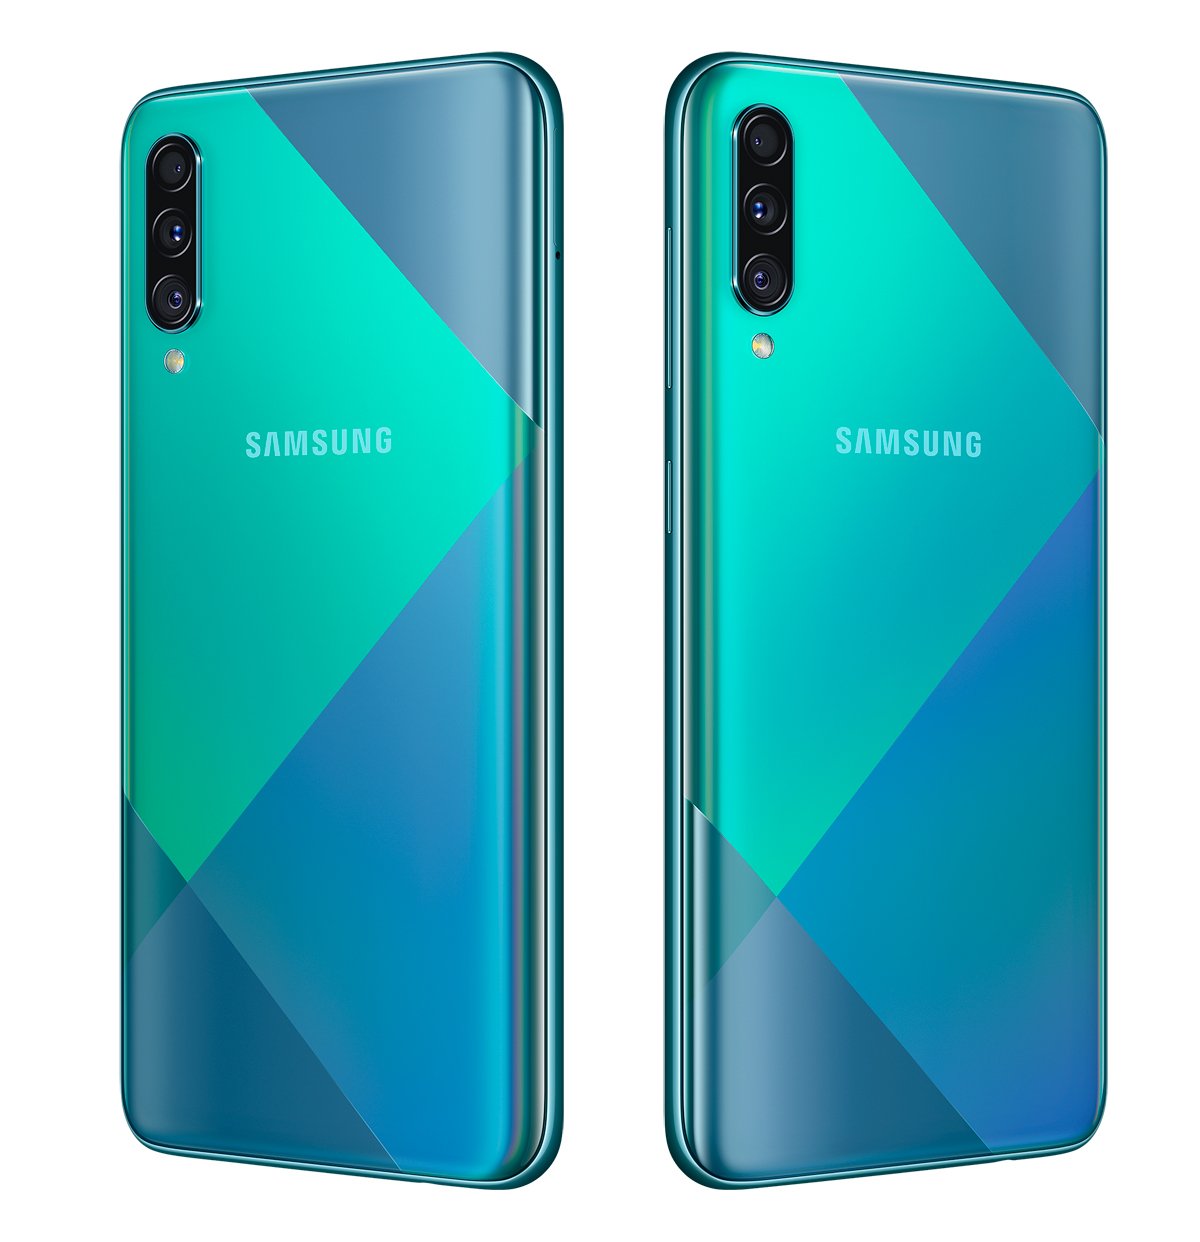 vahiy Kilise ilahi  Samsung Galaxy A50s specs, review, release date - PhonesData